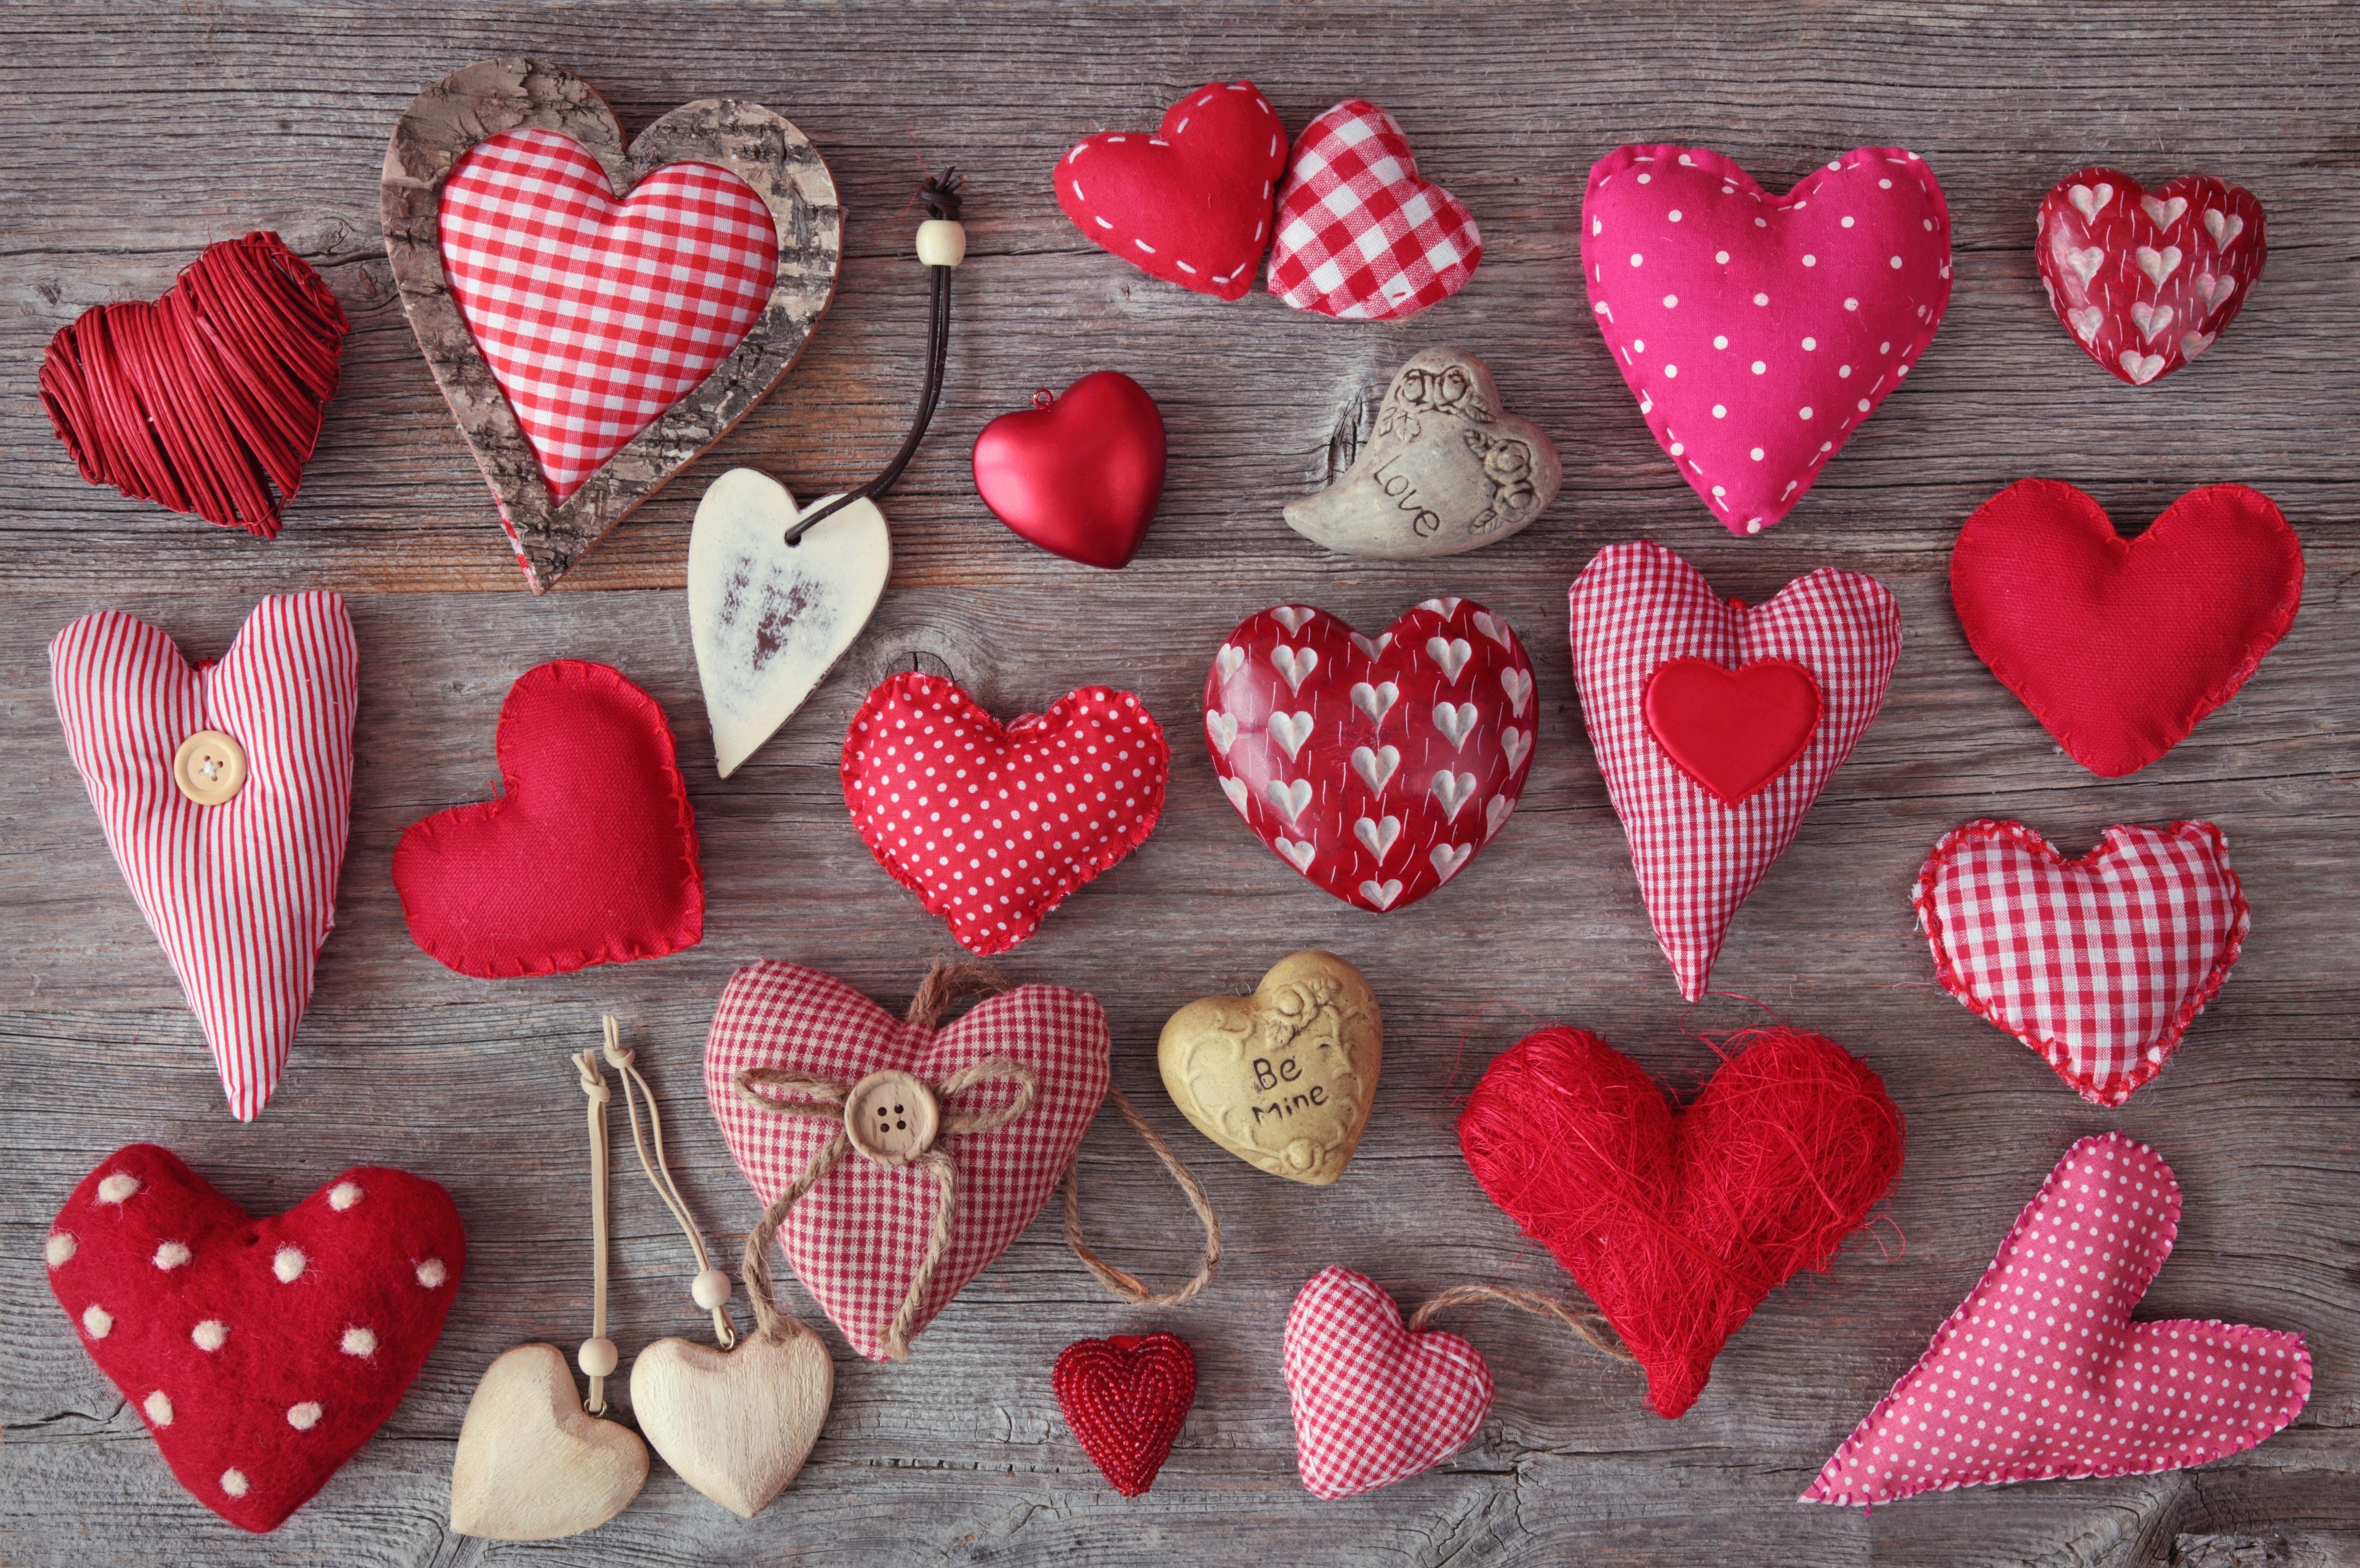 hearts, love, pink, red, wood, tree, cloth, pads, lettering, inscriptions Full HD